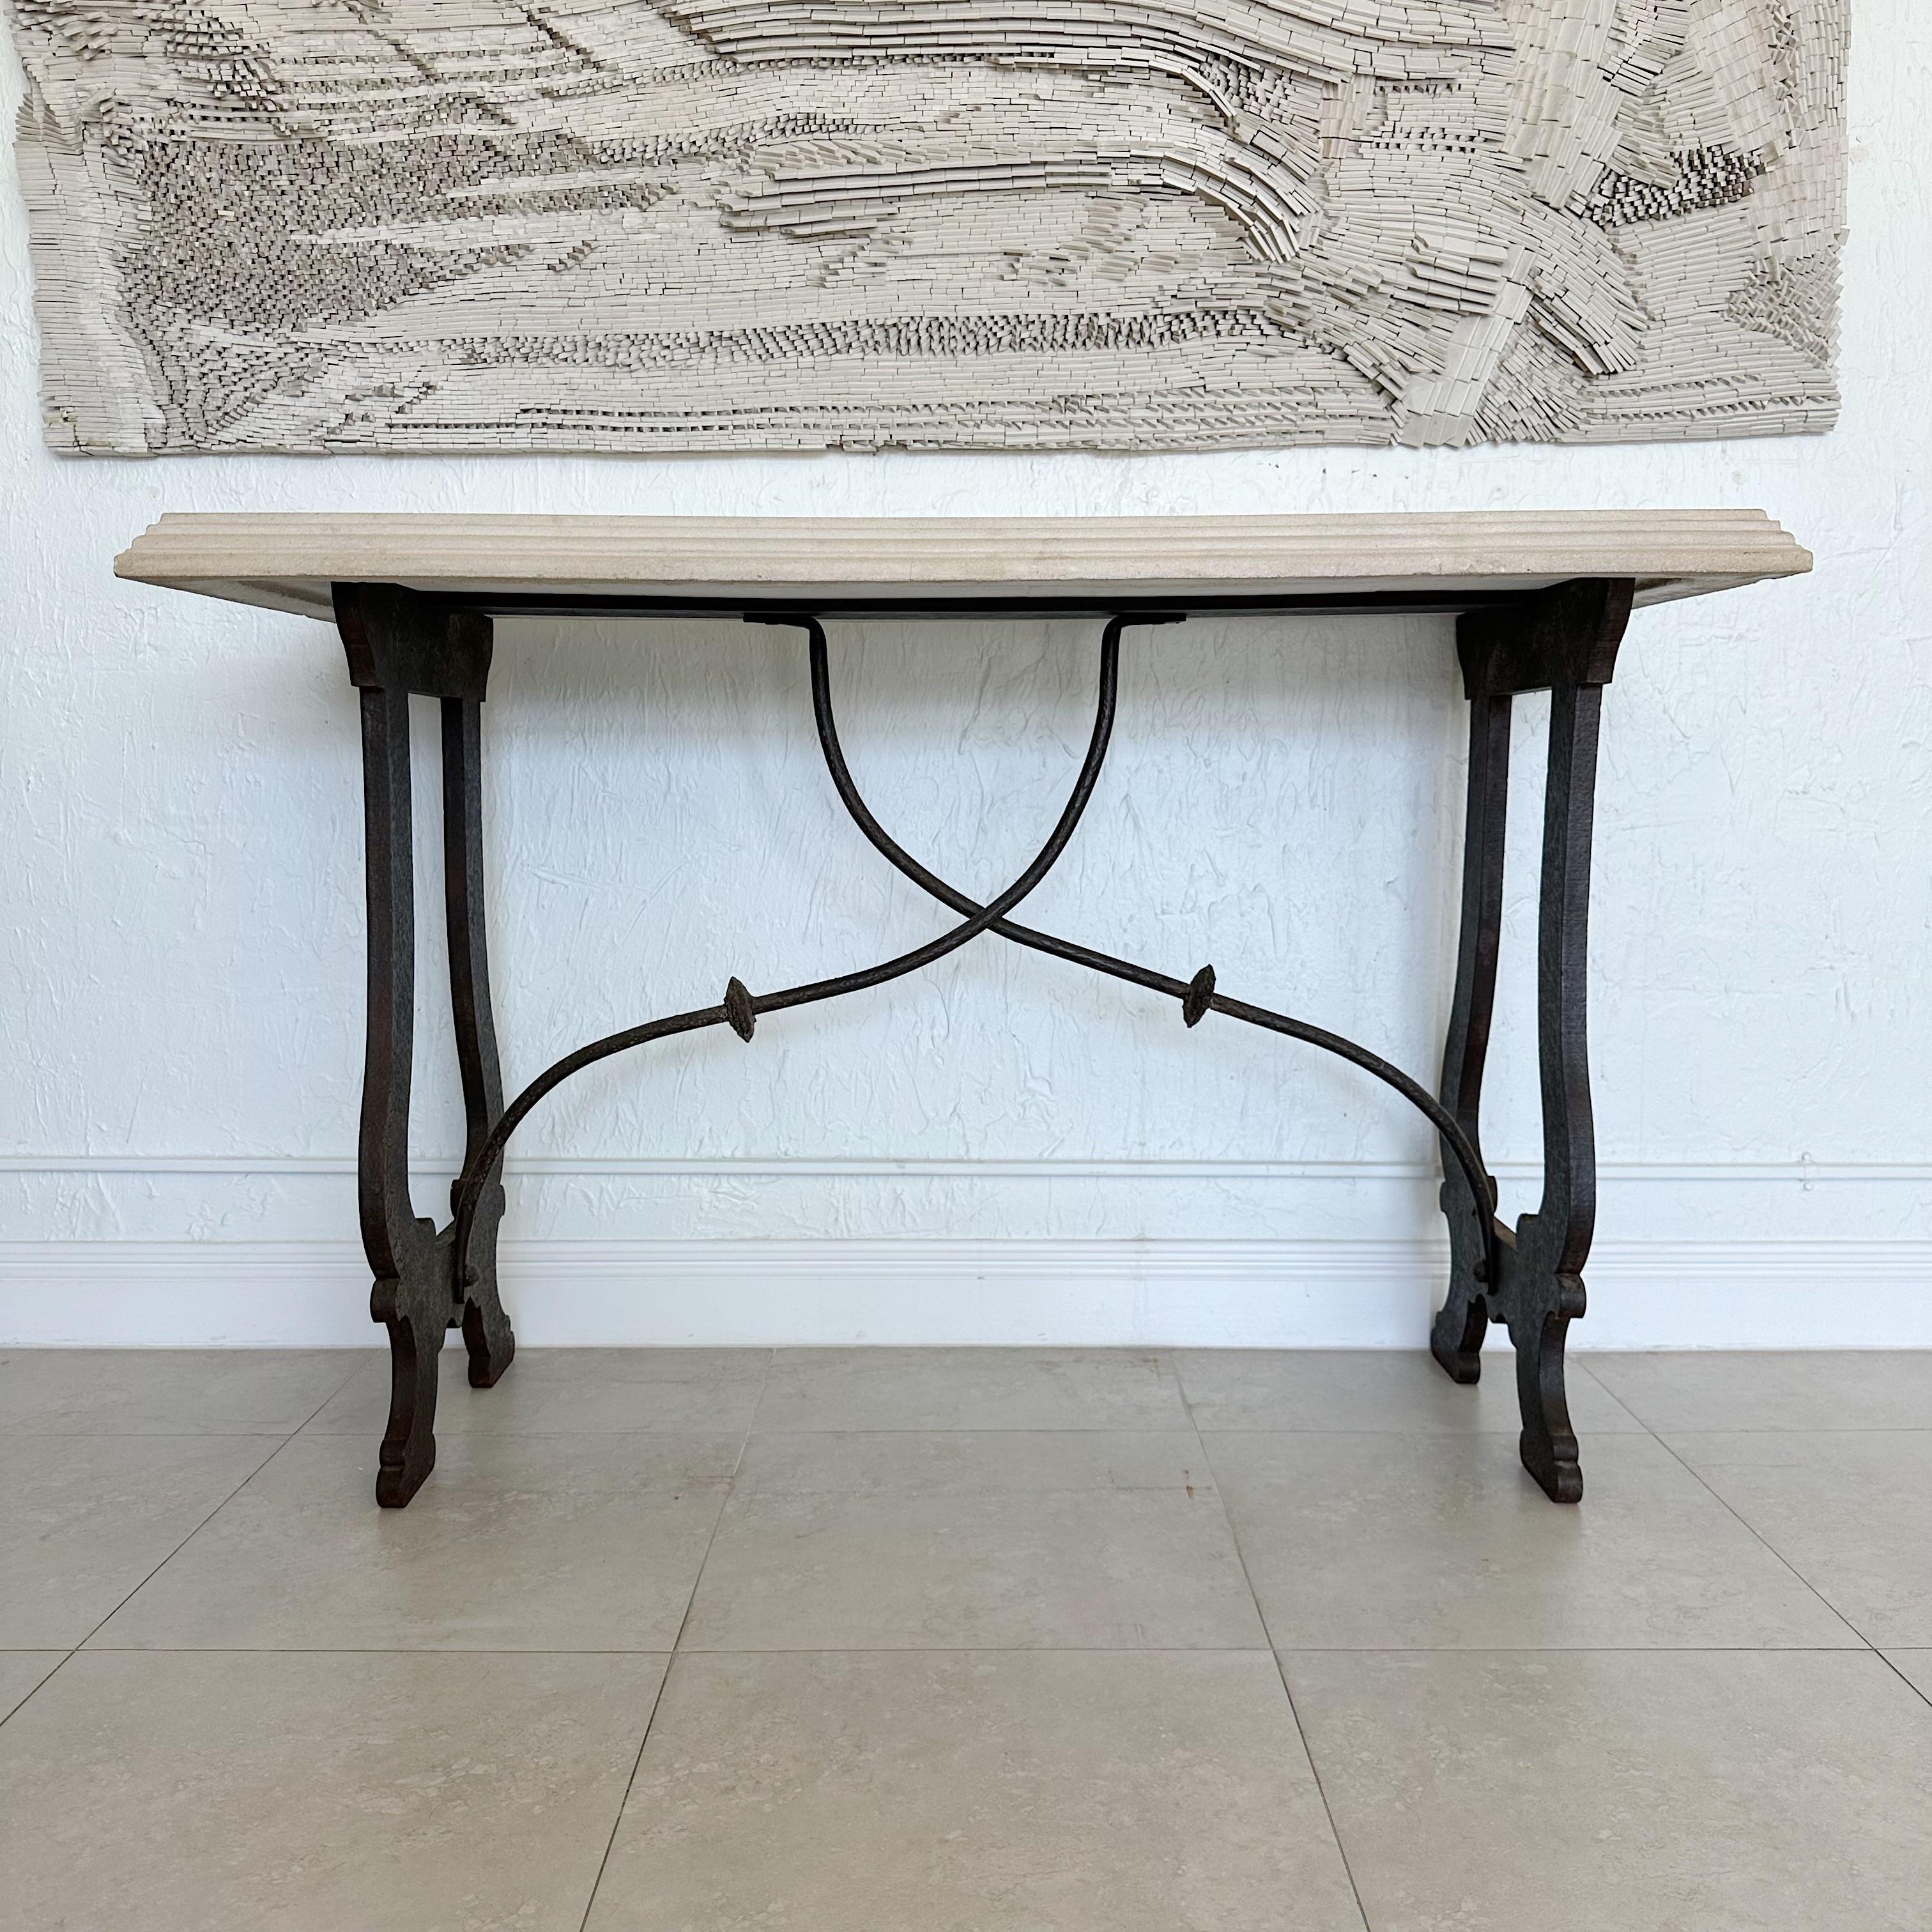 Hand-Crafted Console Tables with Stone Tops and Iron Bases in 18th Century Style, 1980s